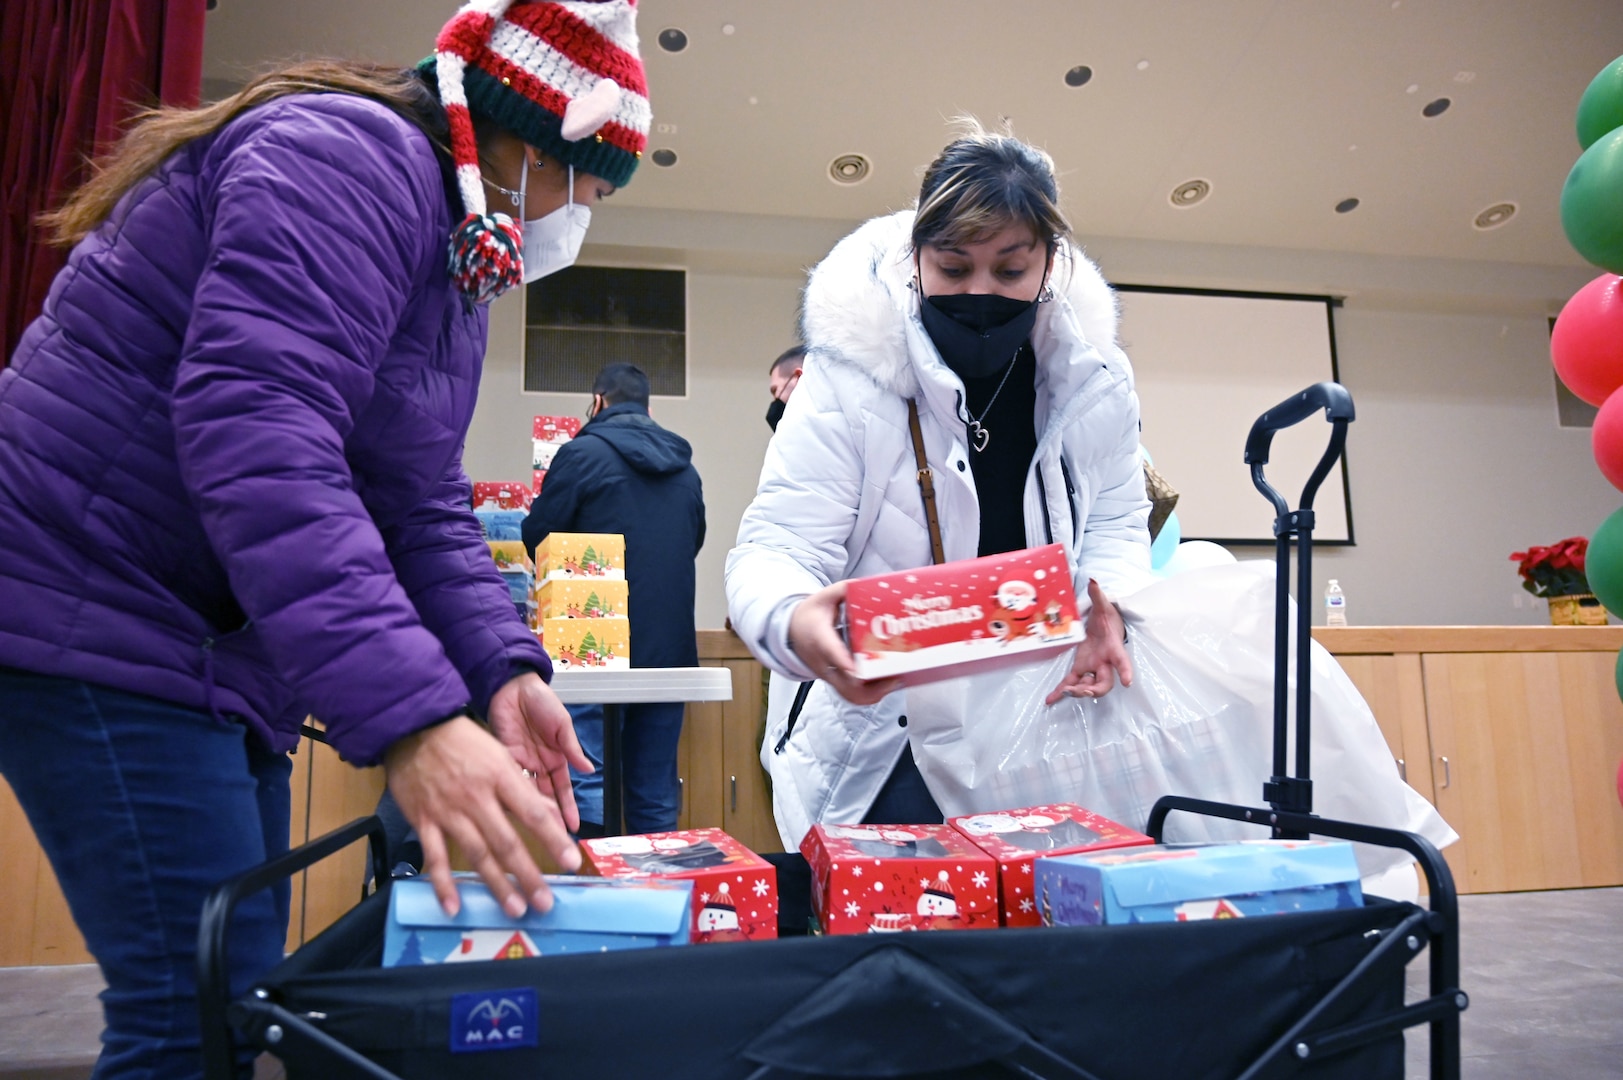 Almost 4,000 cookies delivered to boost service member morale